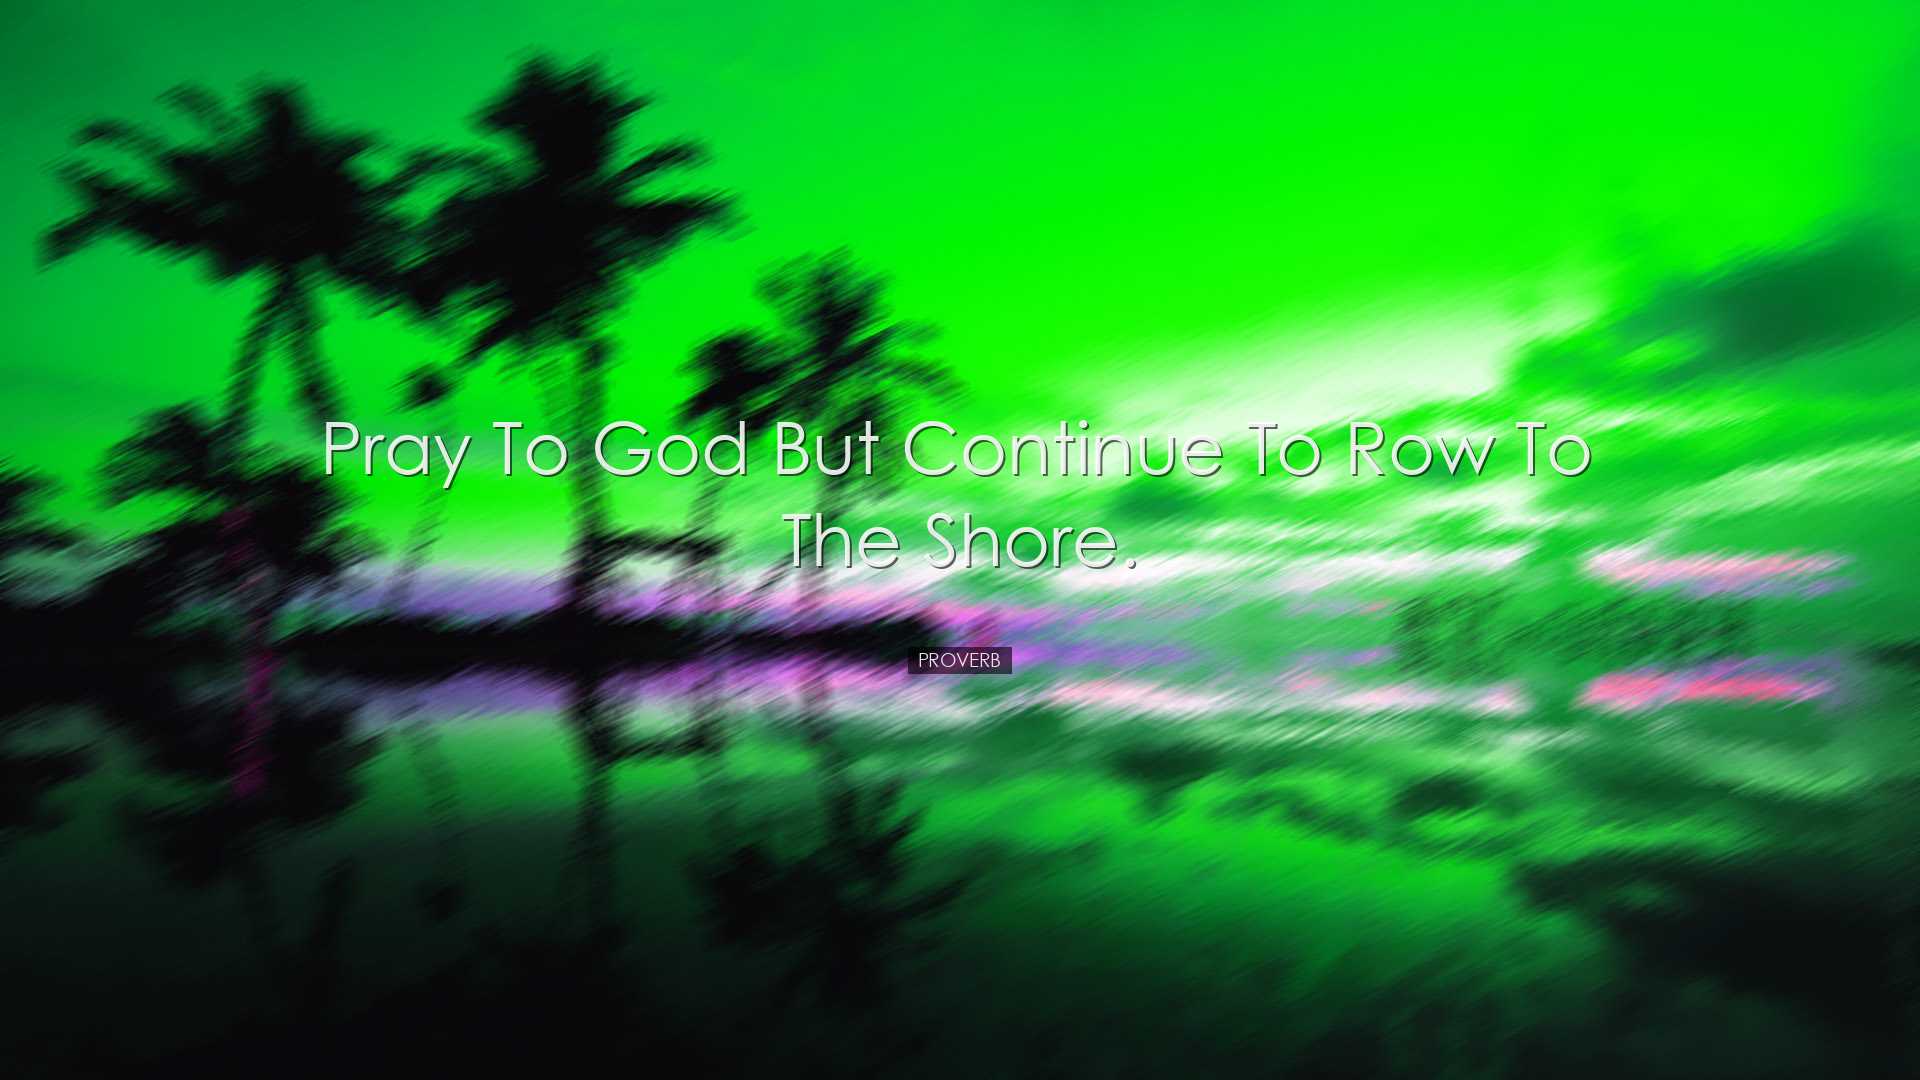 Pray to God but continue to row to the shore. - Proverb